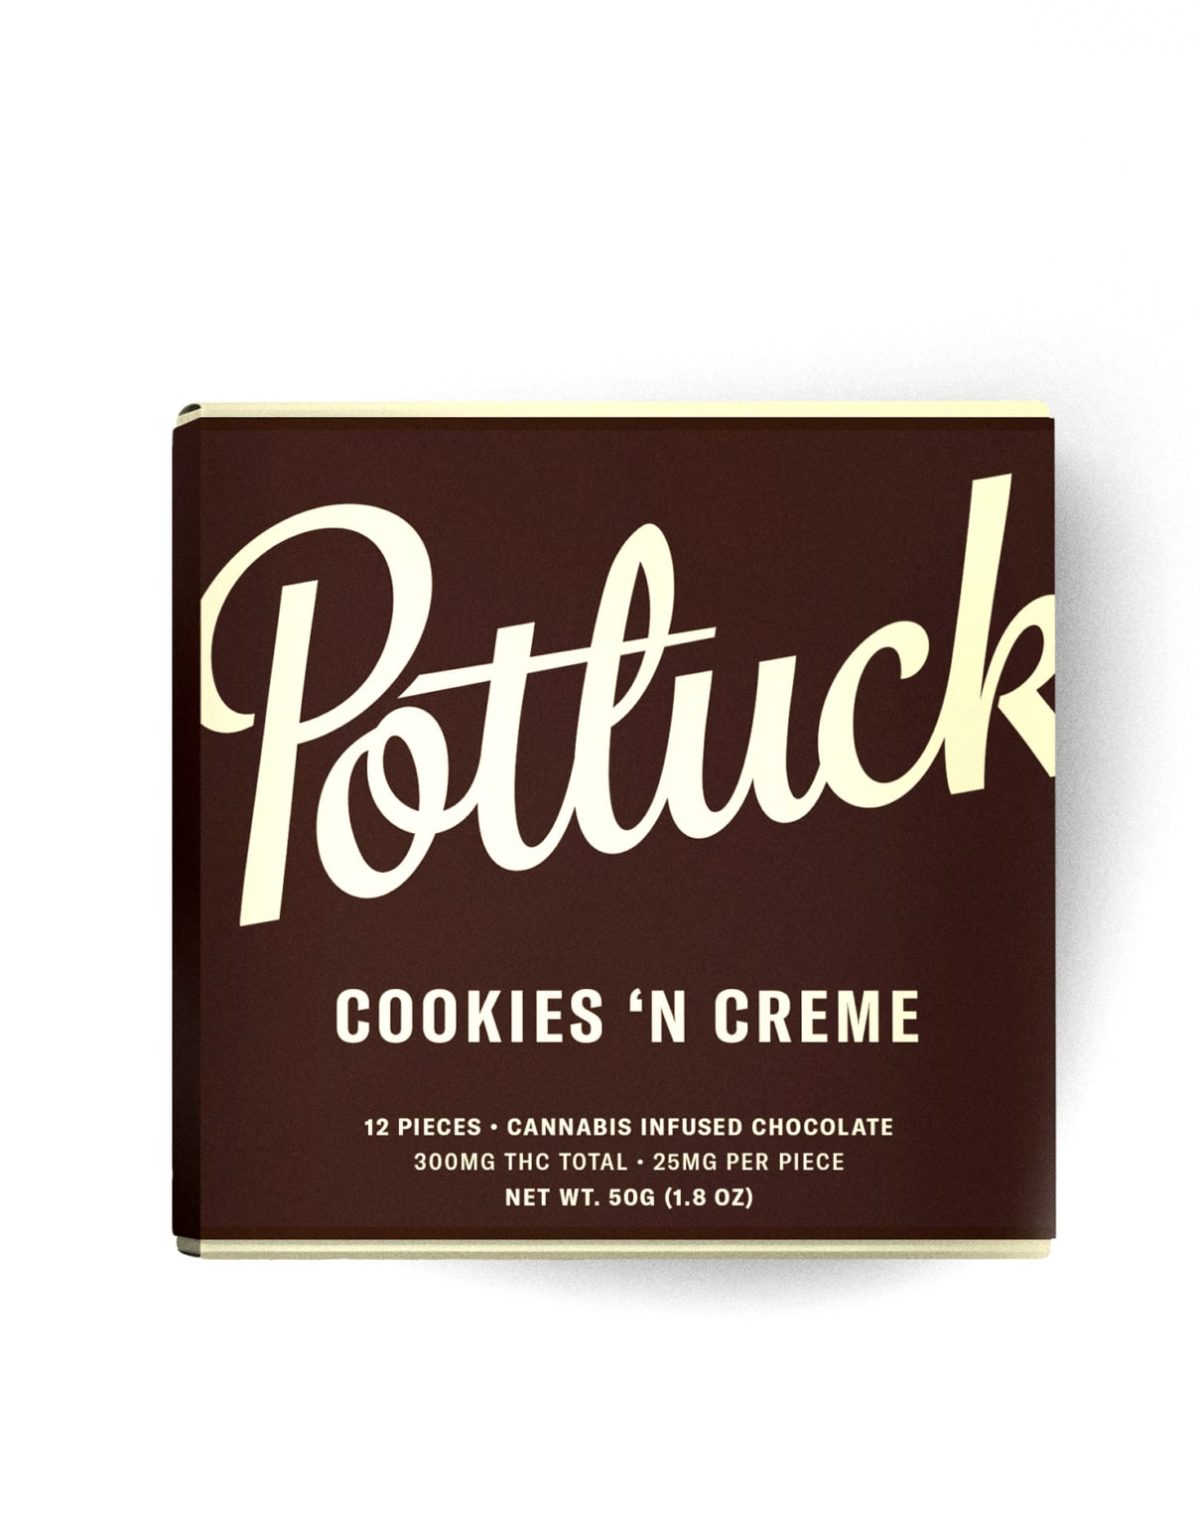 Cookies and Cream by Potluck